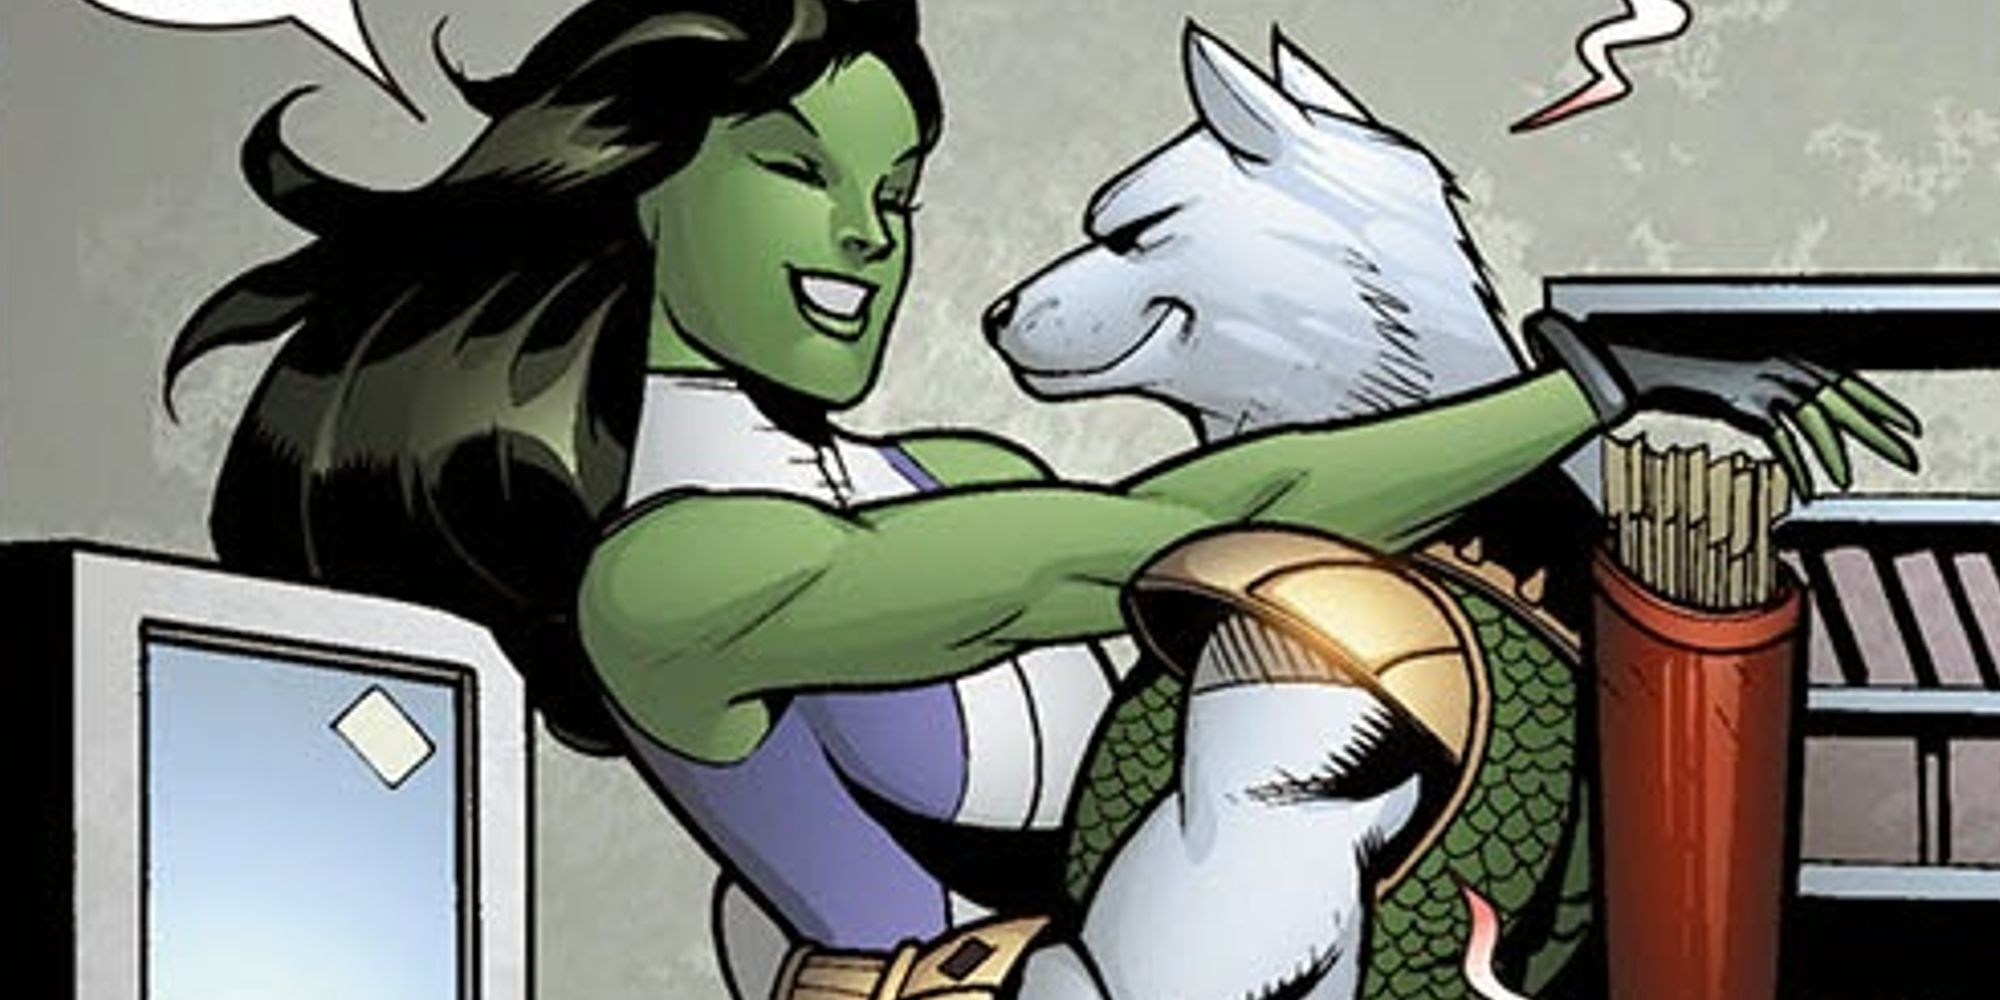 Jen Walters and John Jameson embracing each other as She-Hulk and Man-Wolf in She-Hulk #11.